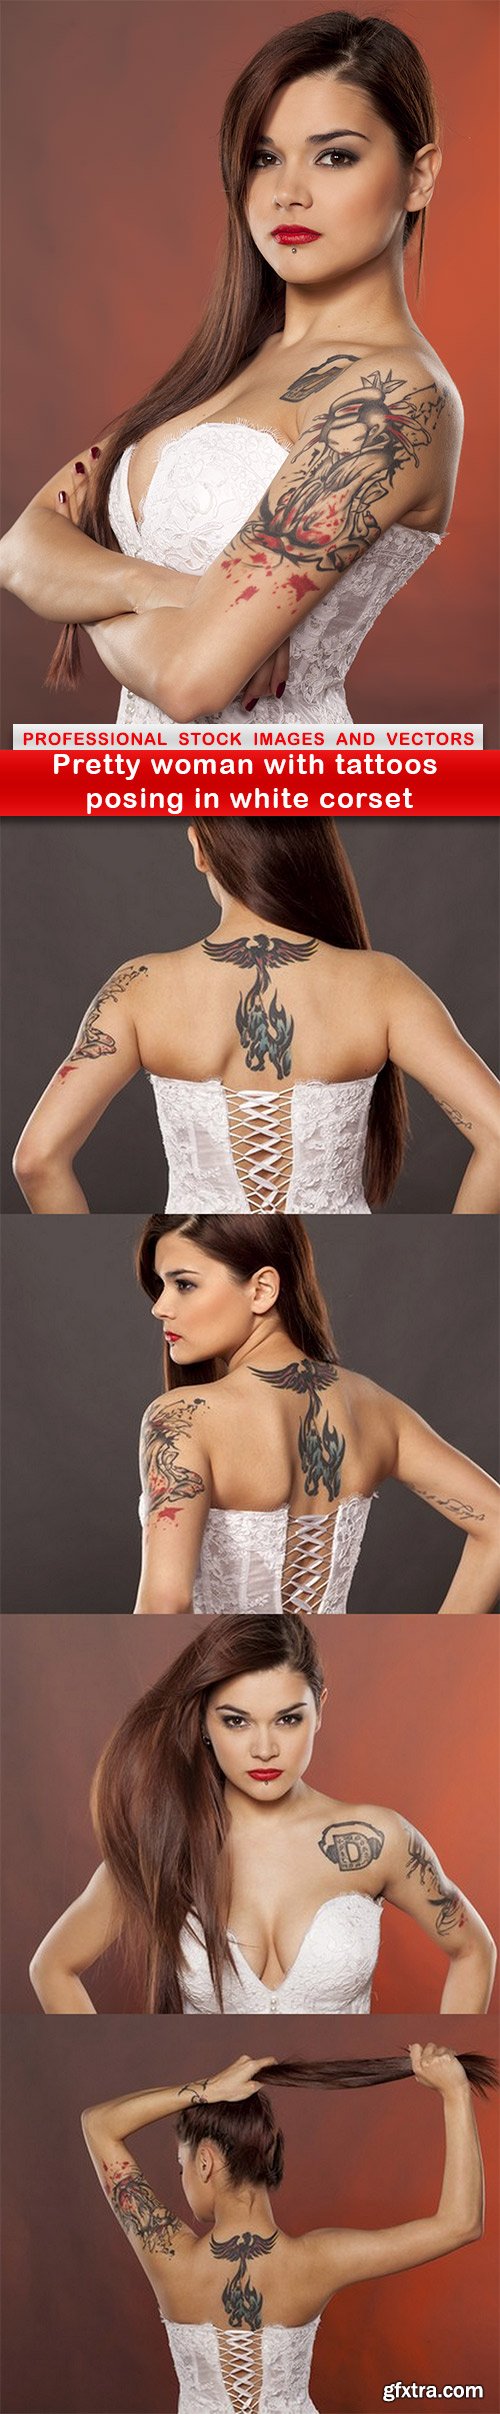 Pretty woman with tattoos posing in white corset - 5 UHQ JPEG